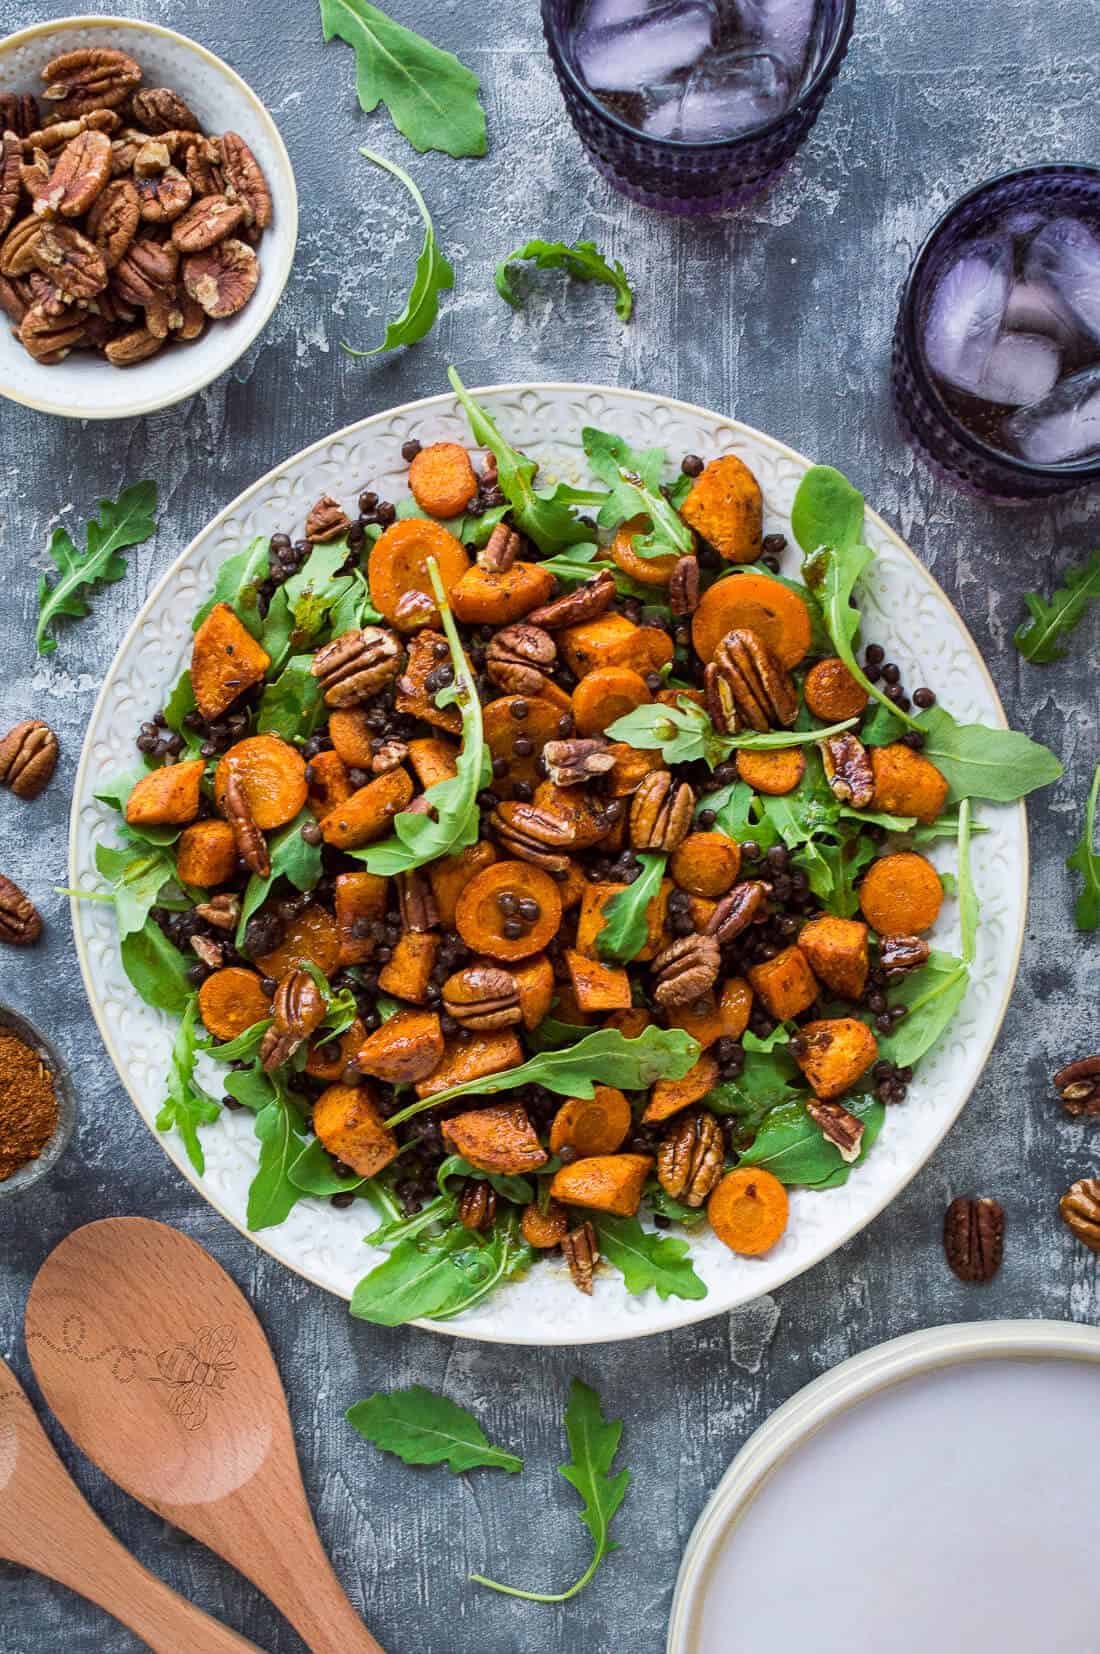 A plate of vegan roasted sweet potato, lentil and rocket salad with toasted pecans and pomegranate molasses dressing